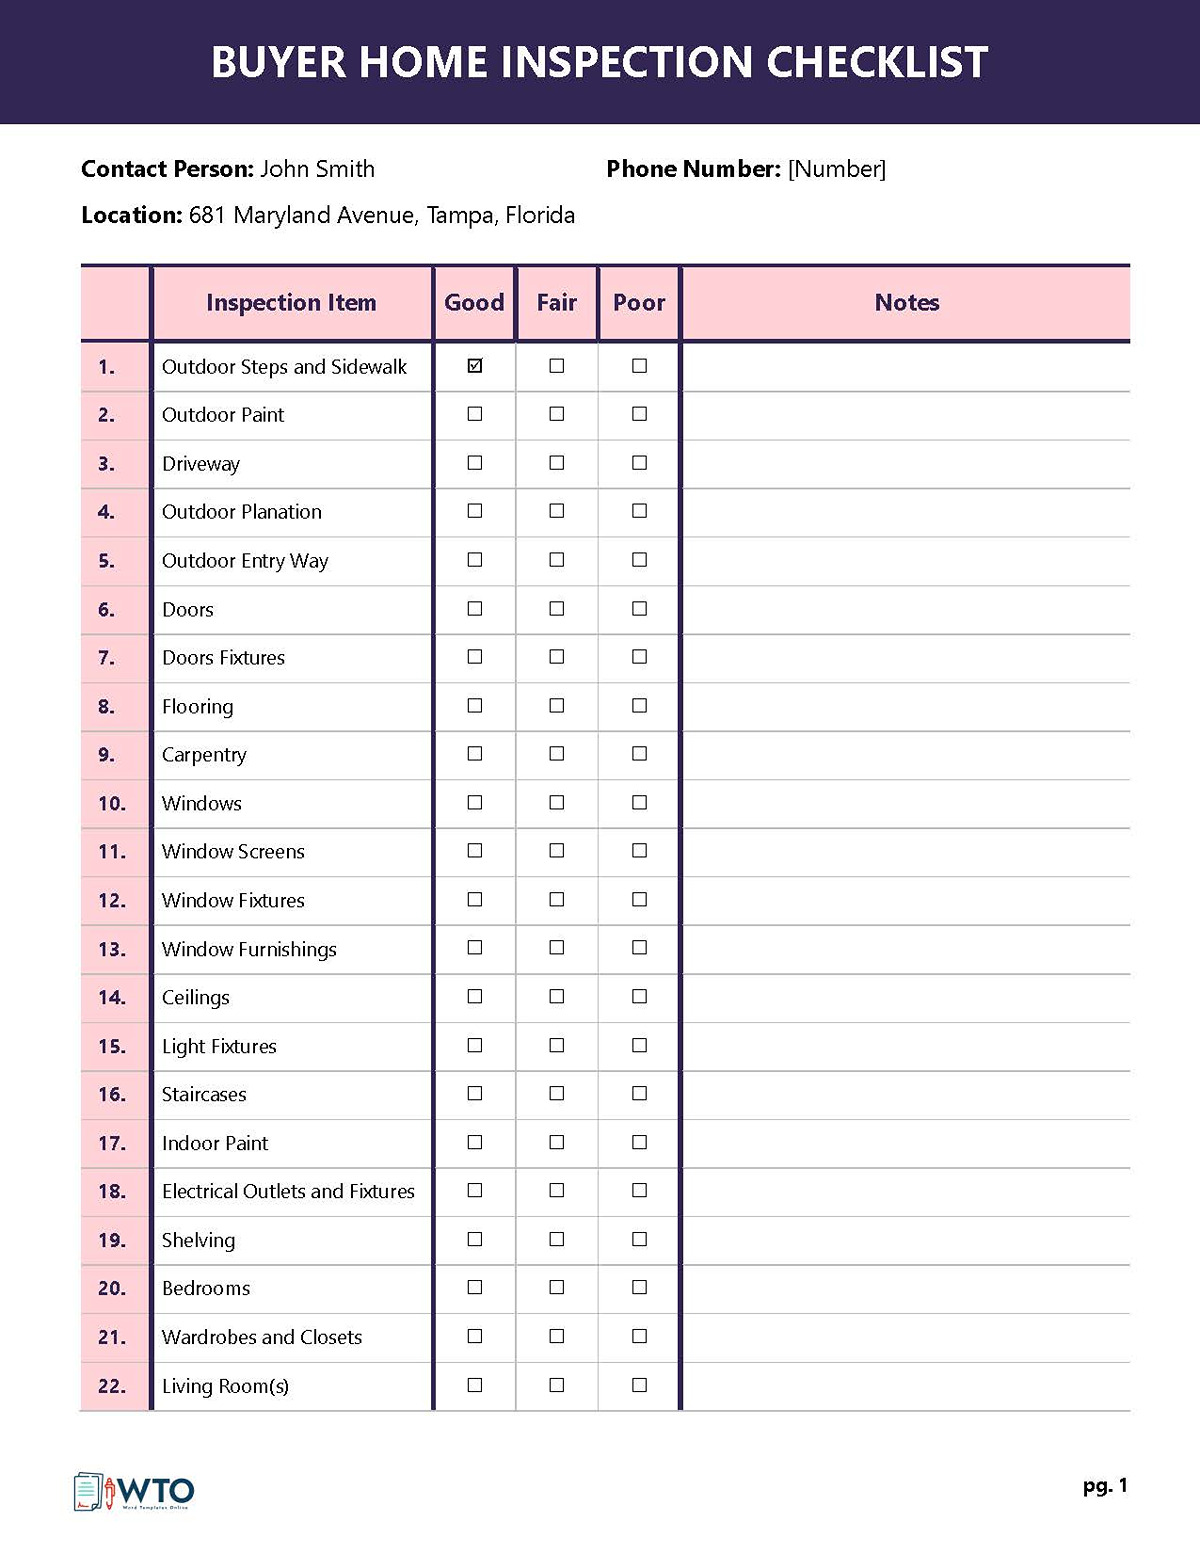 Professional Customizable Buyer Home Inspection Checklist Template as Word Format